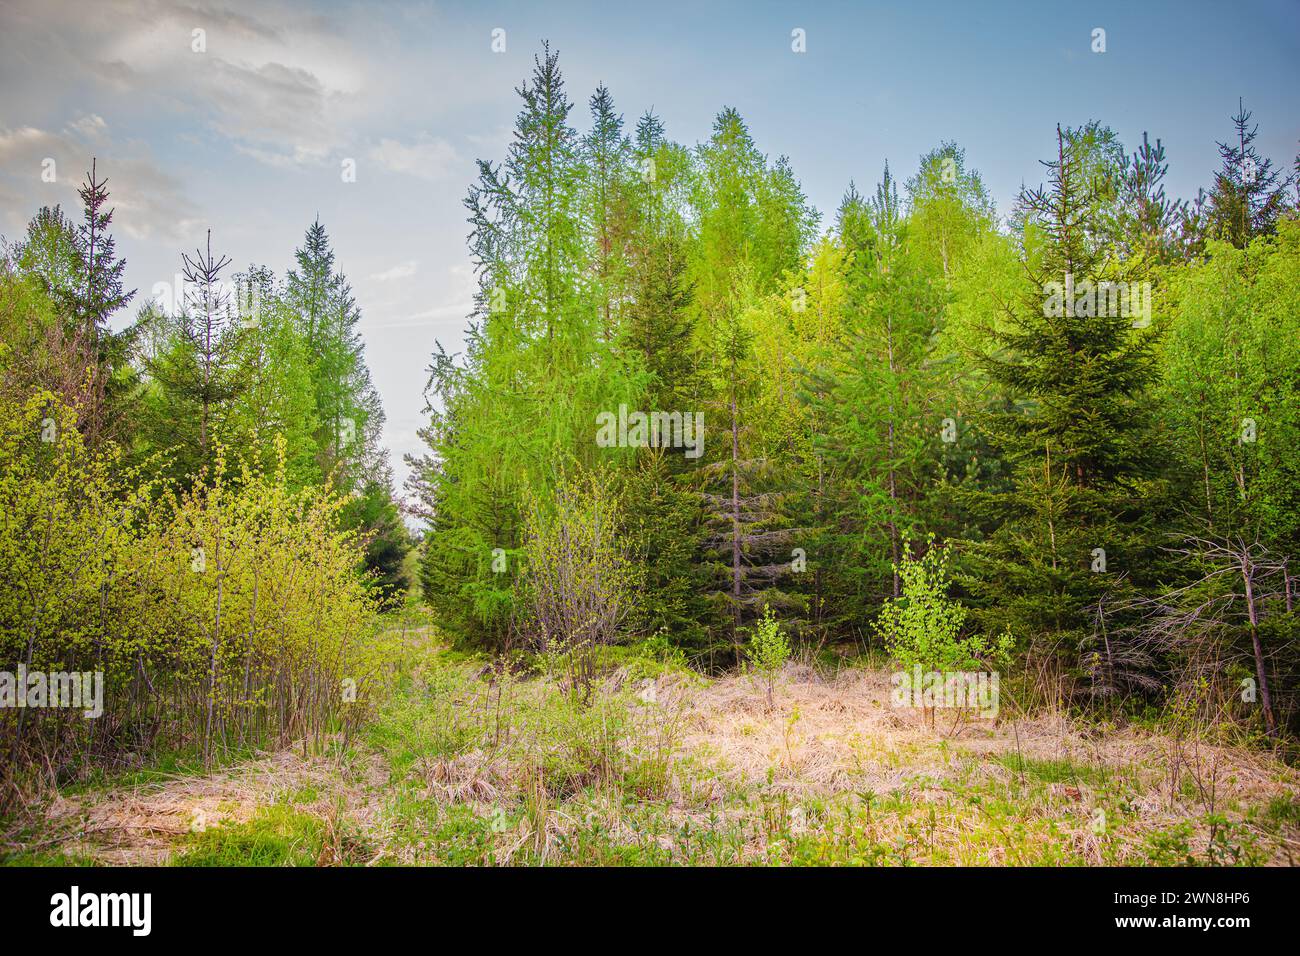 Coniferous trees in the forest Stock Photo